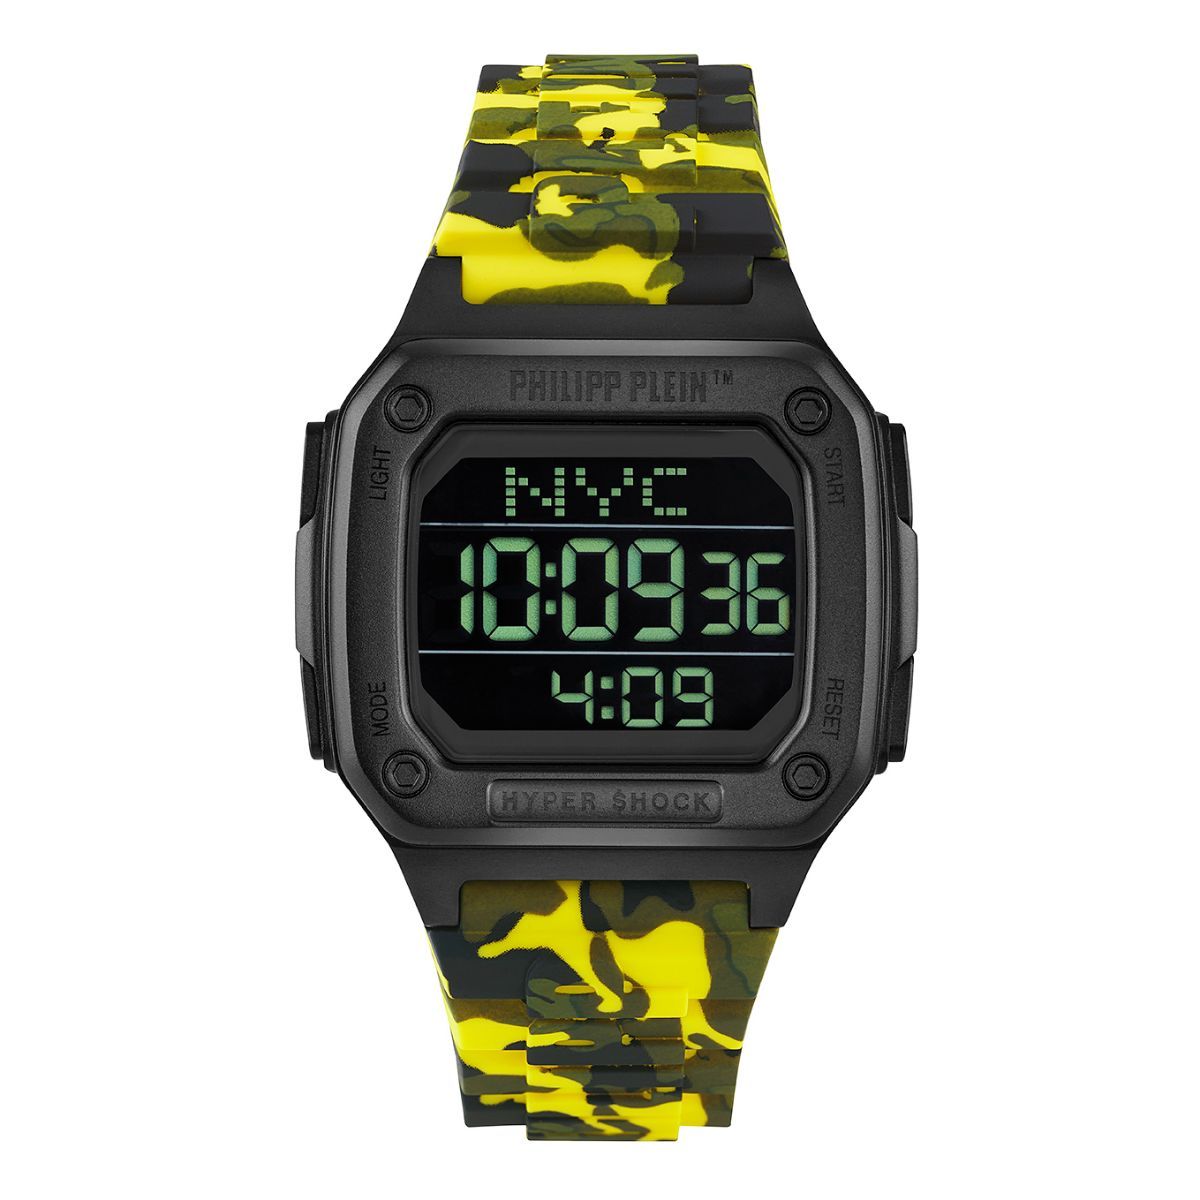 Square Digital Sports Watch - Avon Specialist | Shop Cosmetics | Beauty |  Fashion And Accessories Worldwide